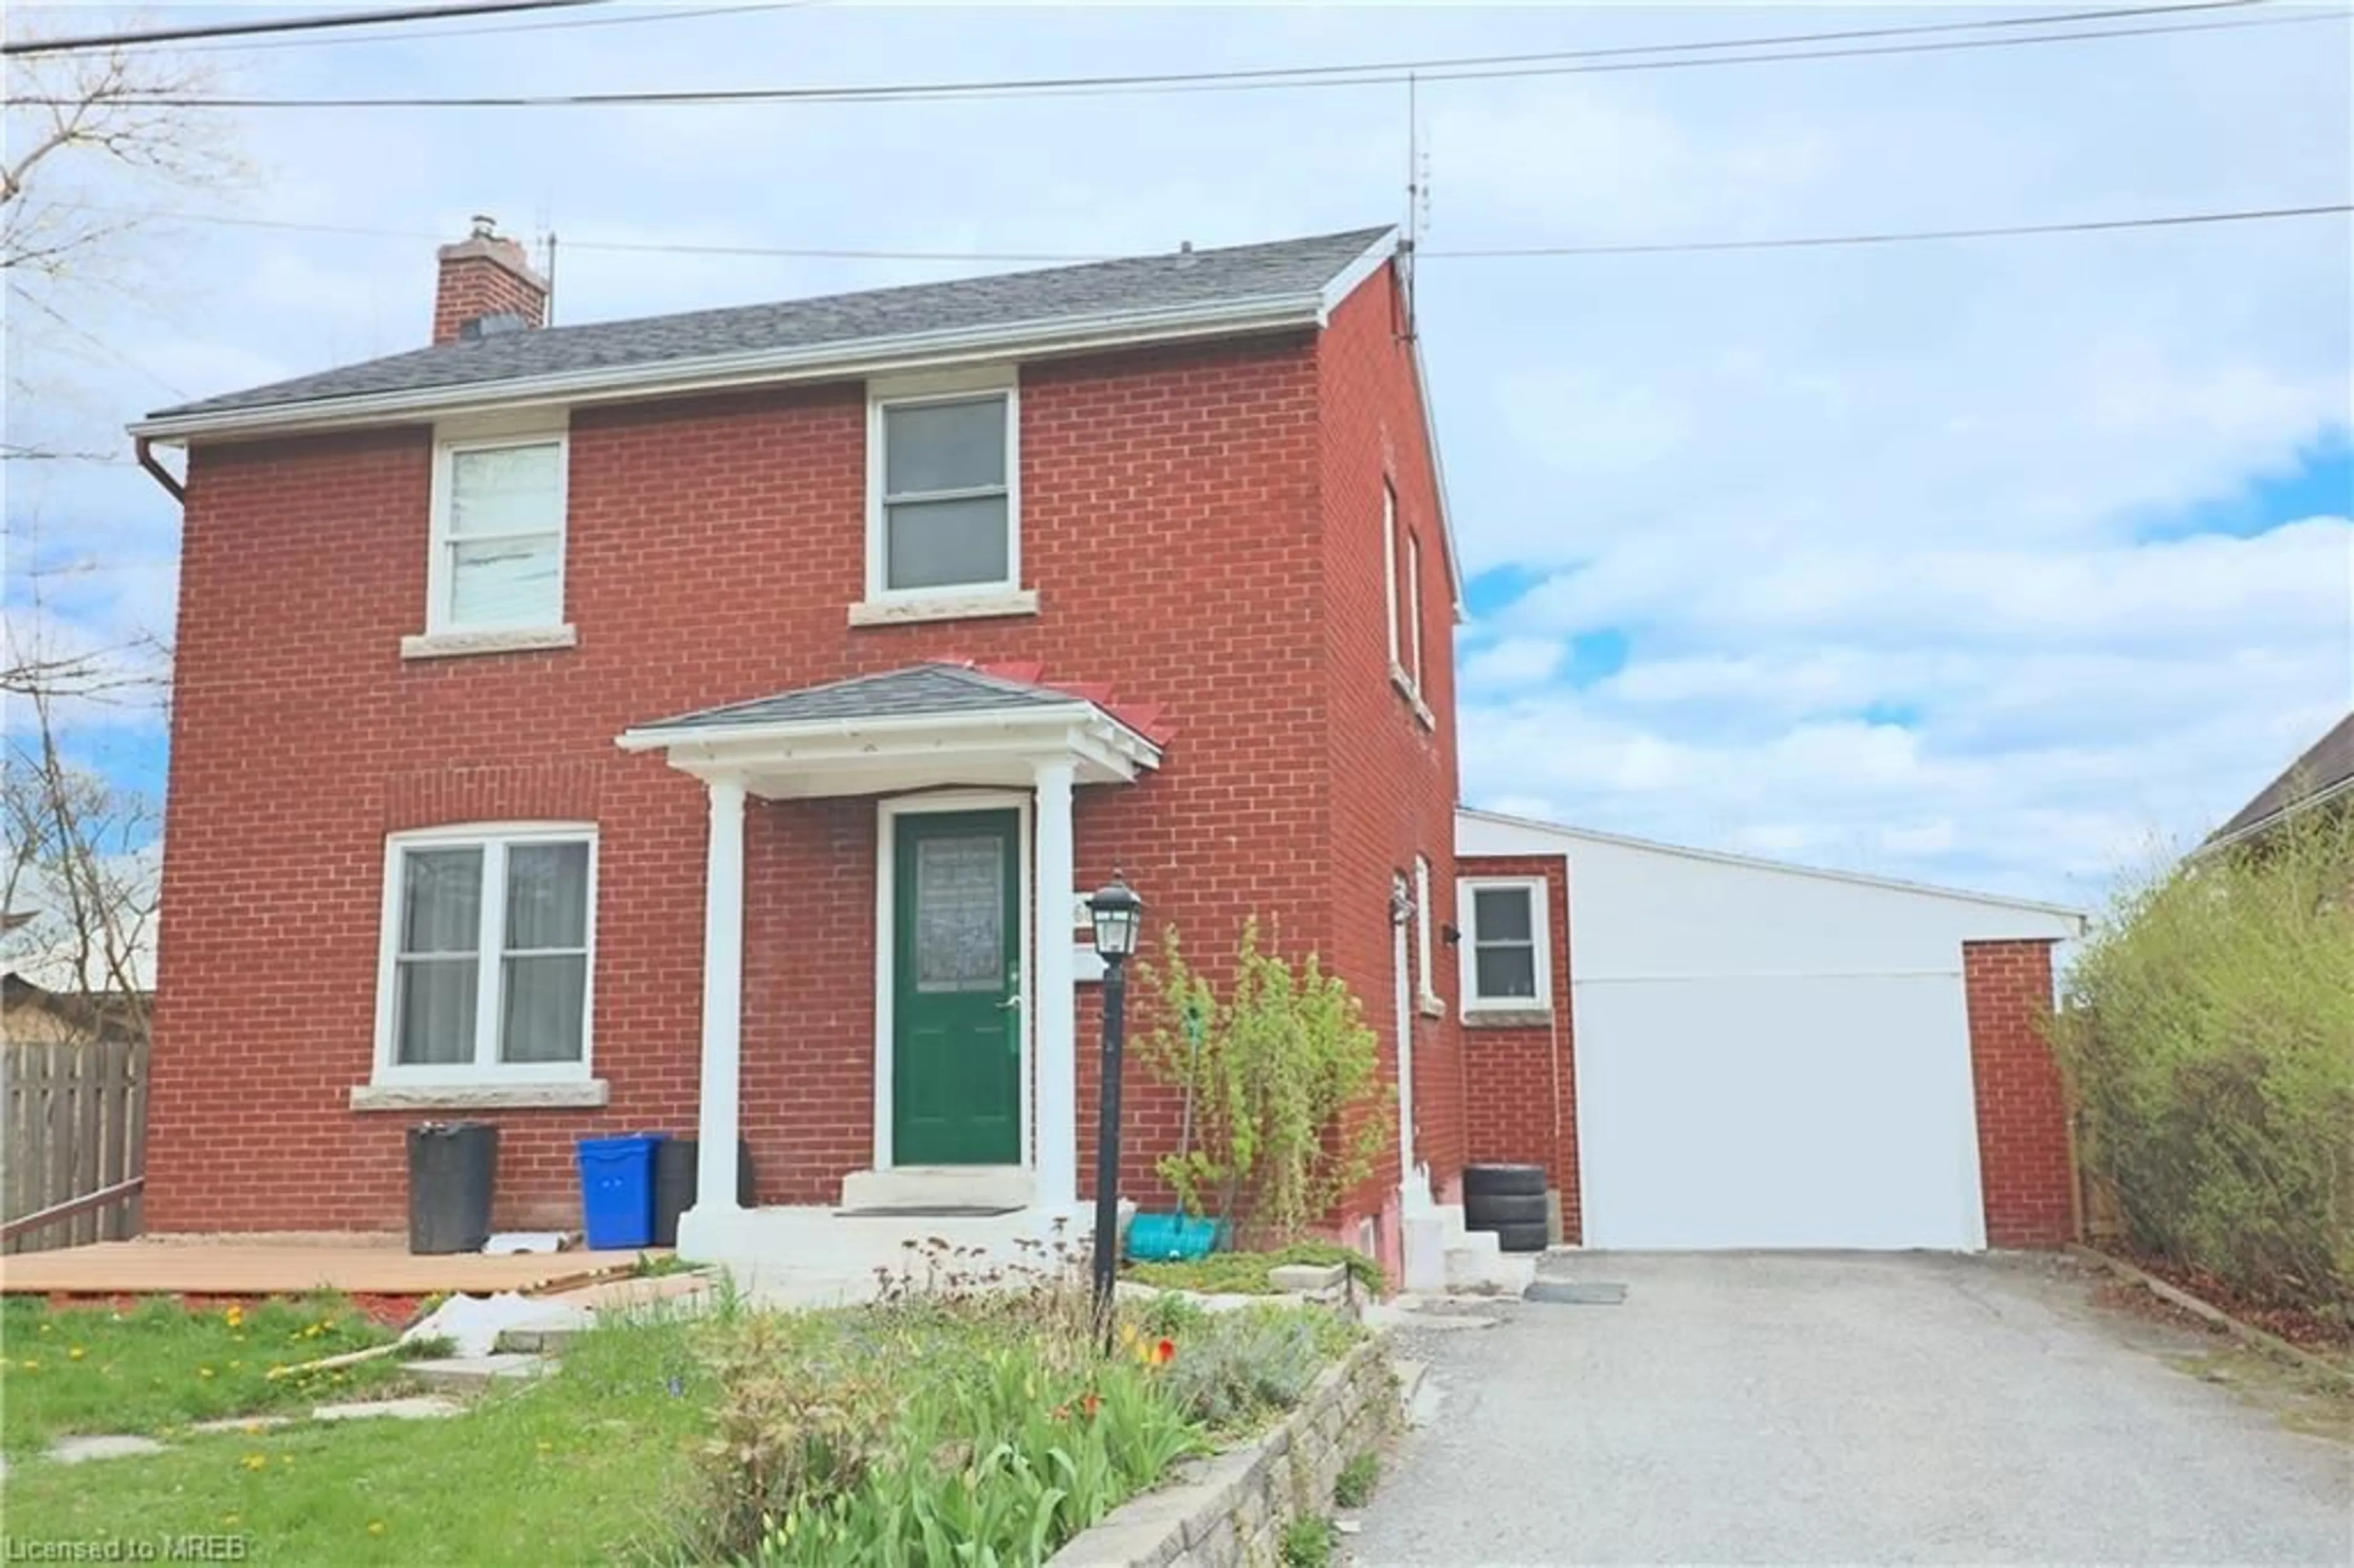 Frontside or backside of a home for 4664 Homewood Ave, Niagara Falls Ontario L2E 4Y2